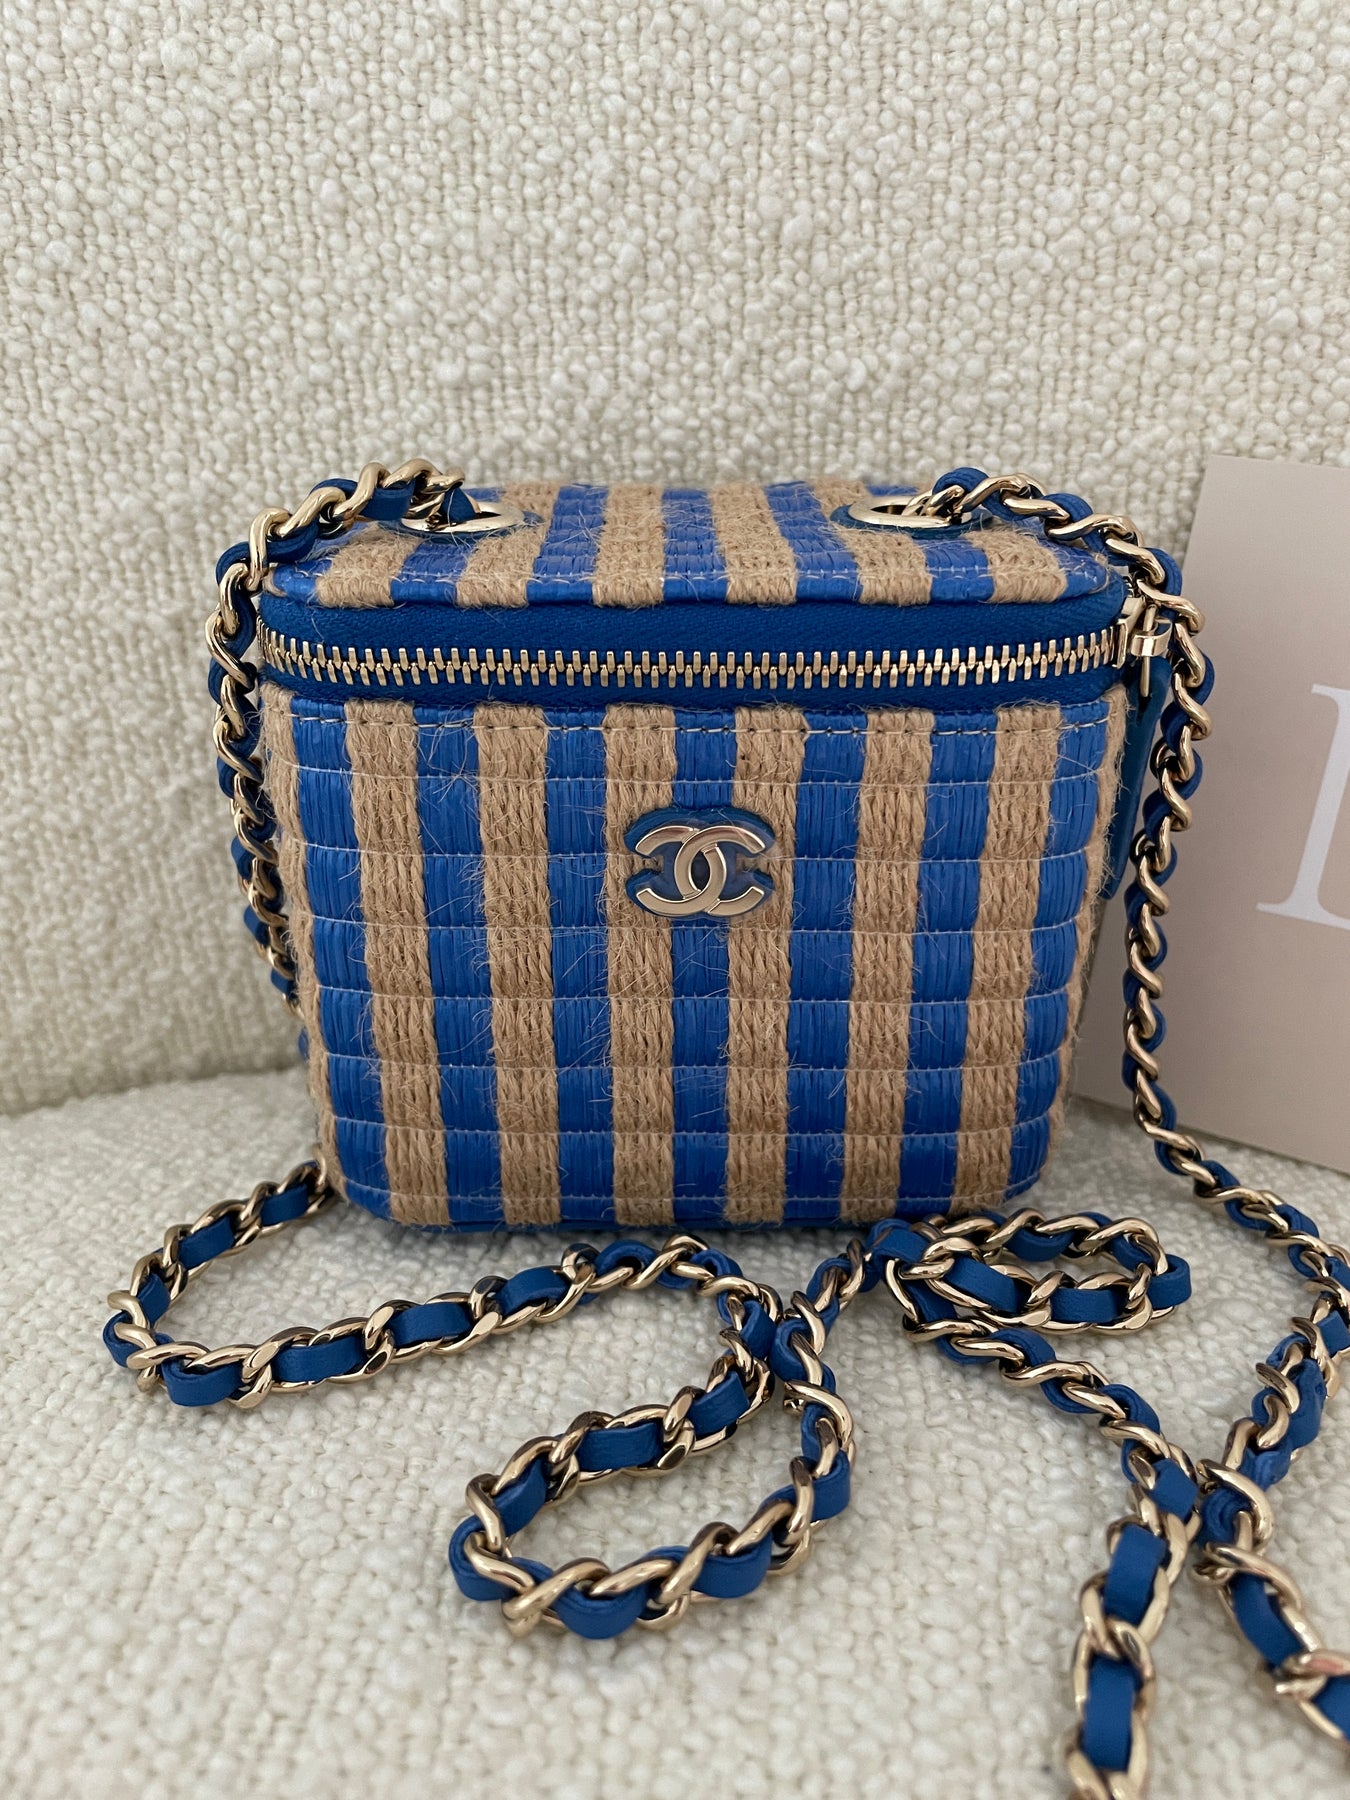 CHANEL Small Blue Vanity With Chain